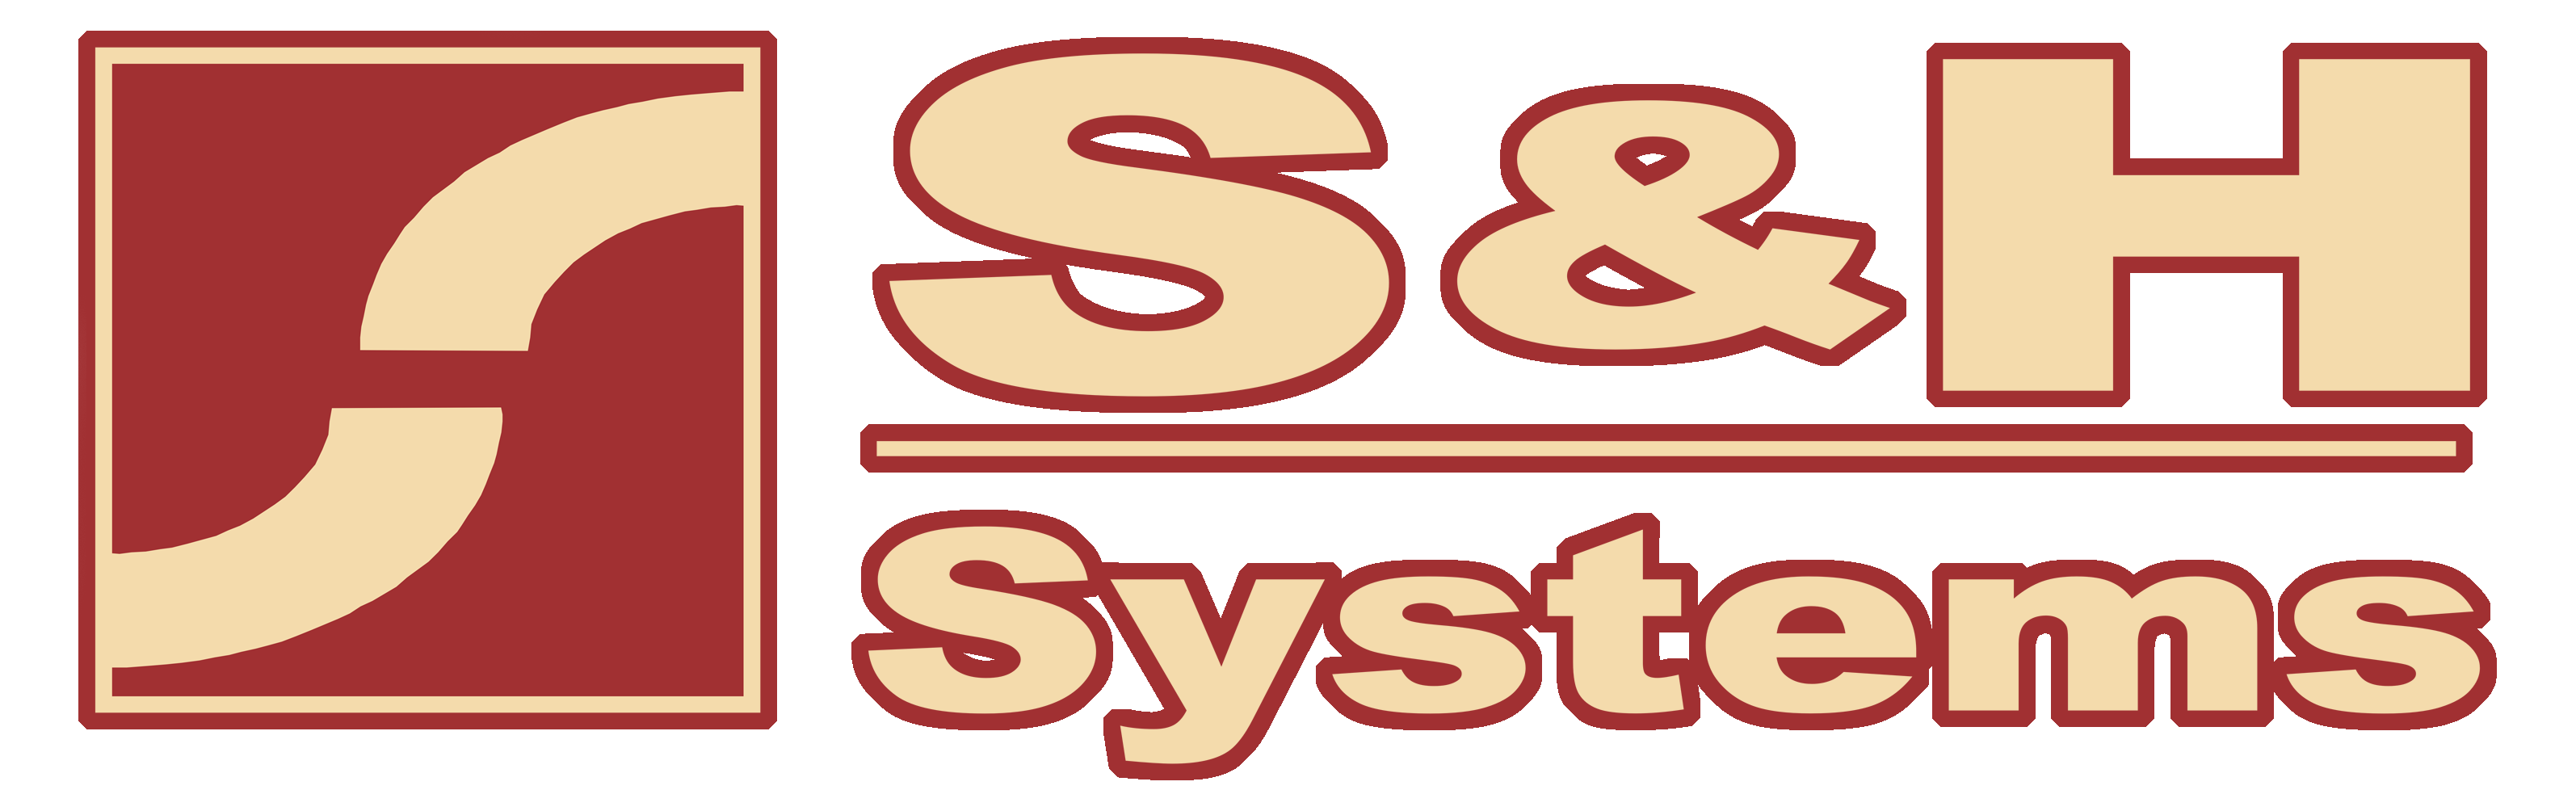 S&H Systems